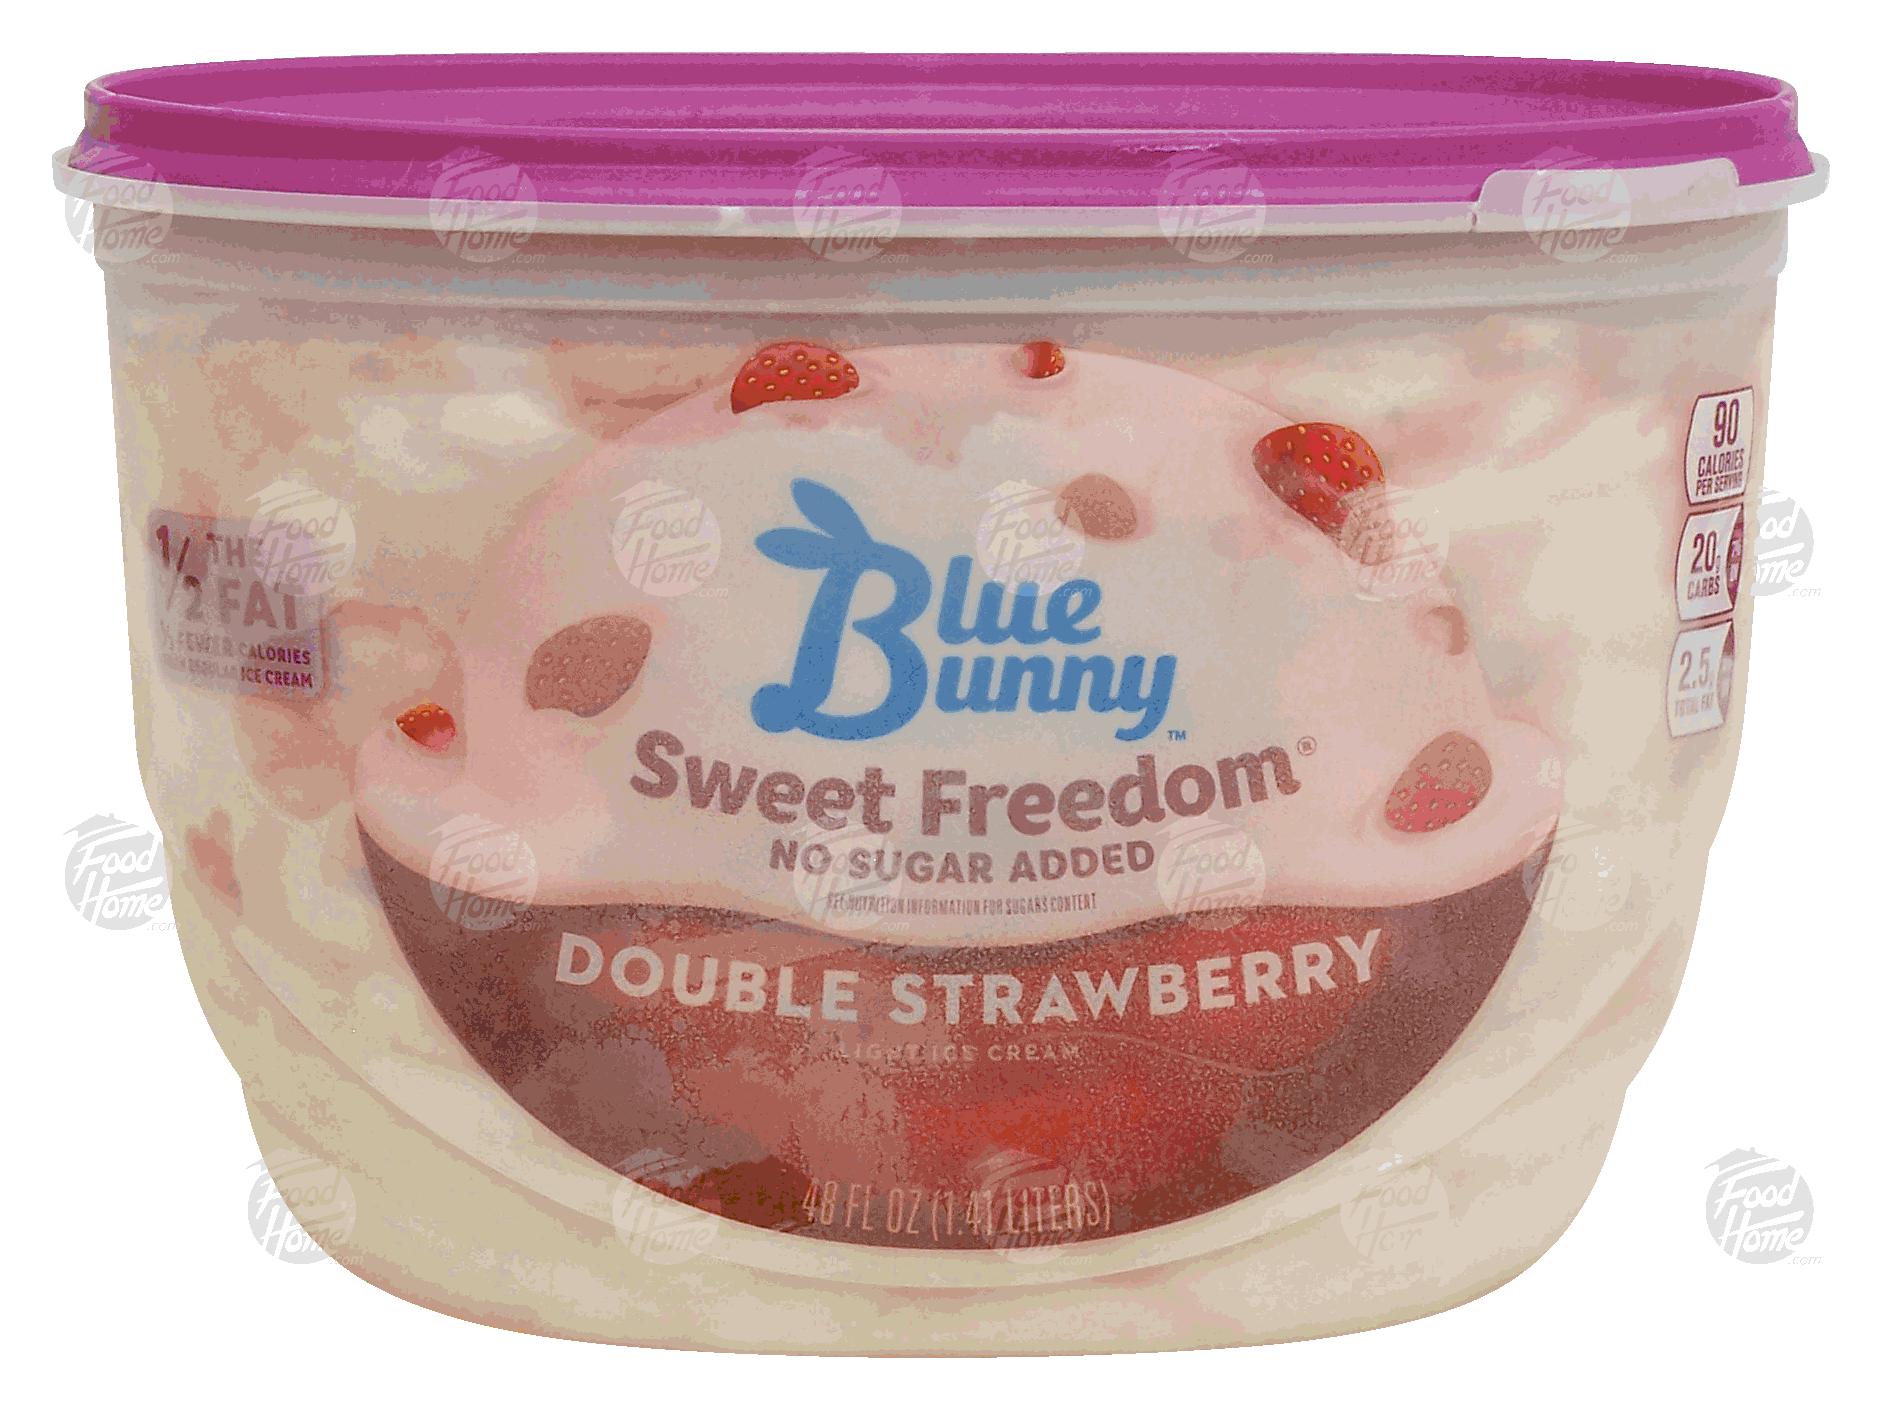 Blue Bunny Sweet Freedom double strawberry ice cream, no sugar added Full-Size Picture